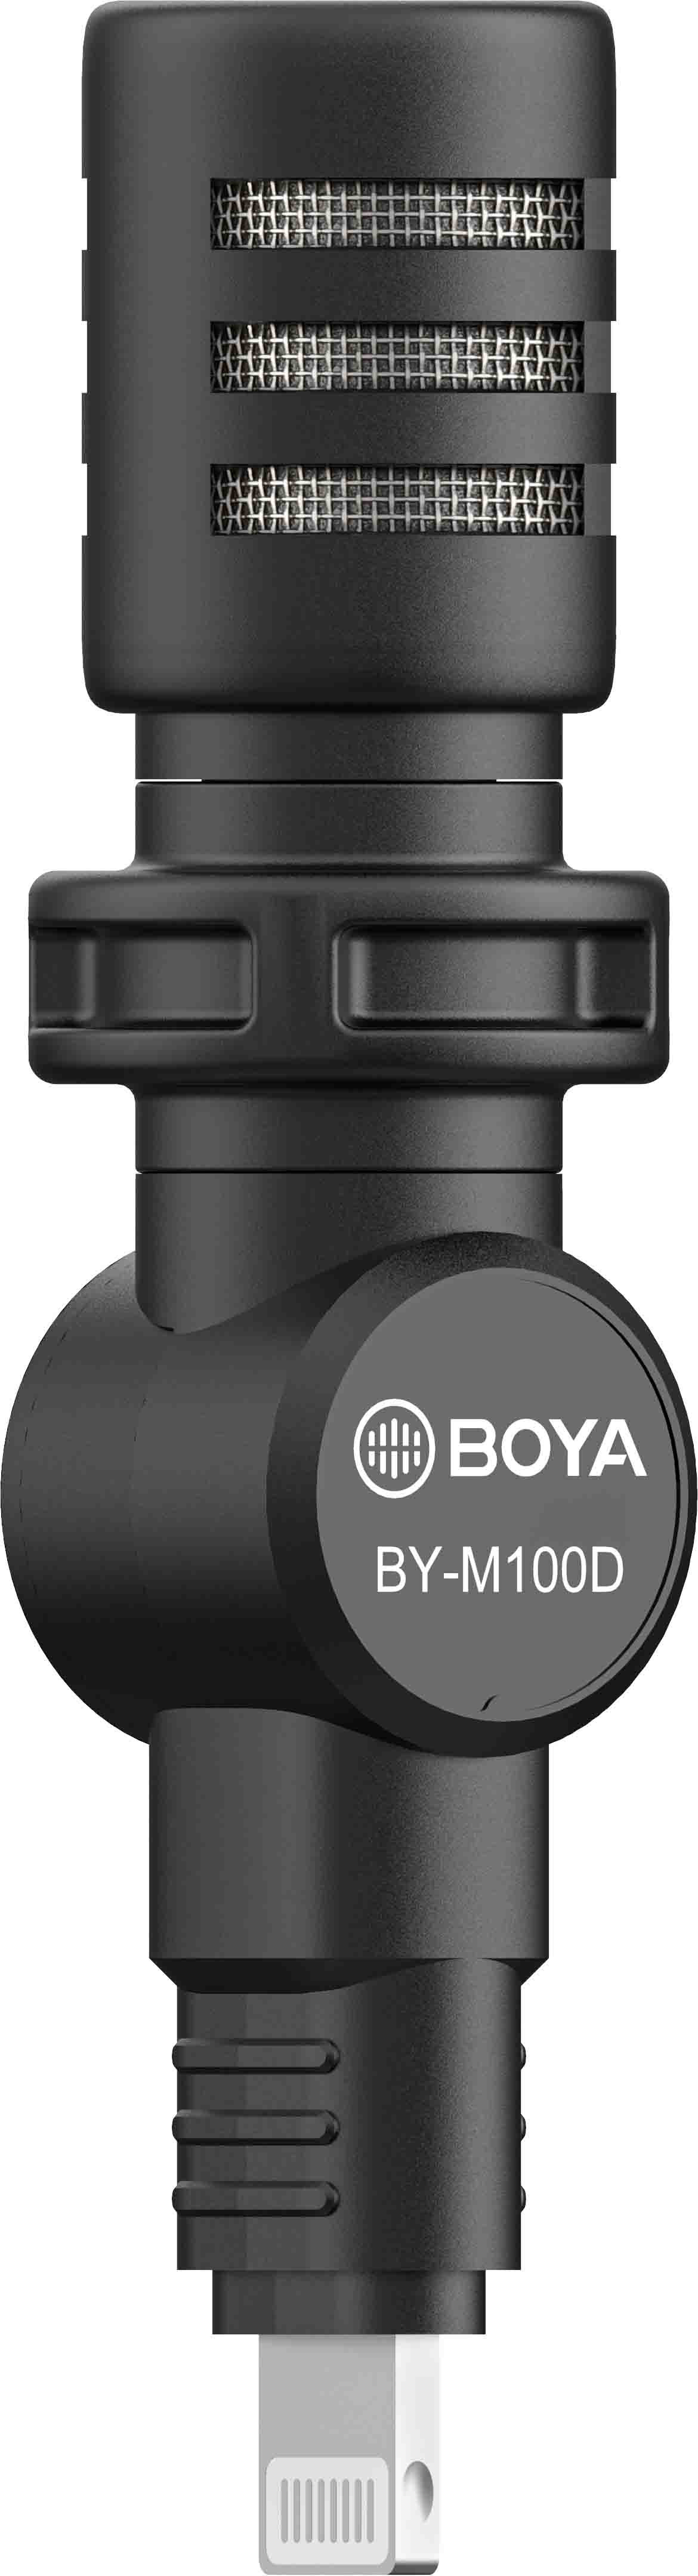 Boya plug and play microphone -for ios devices Mikrofons